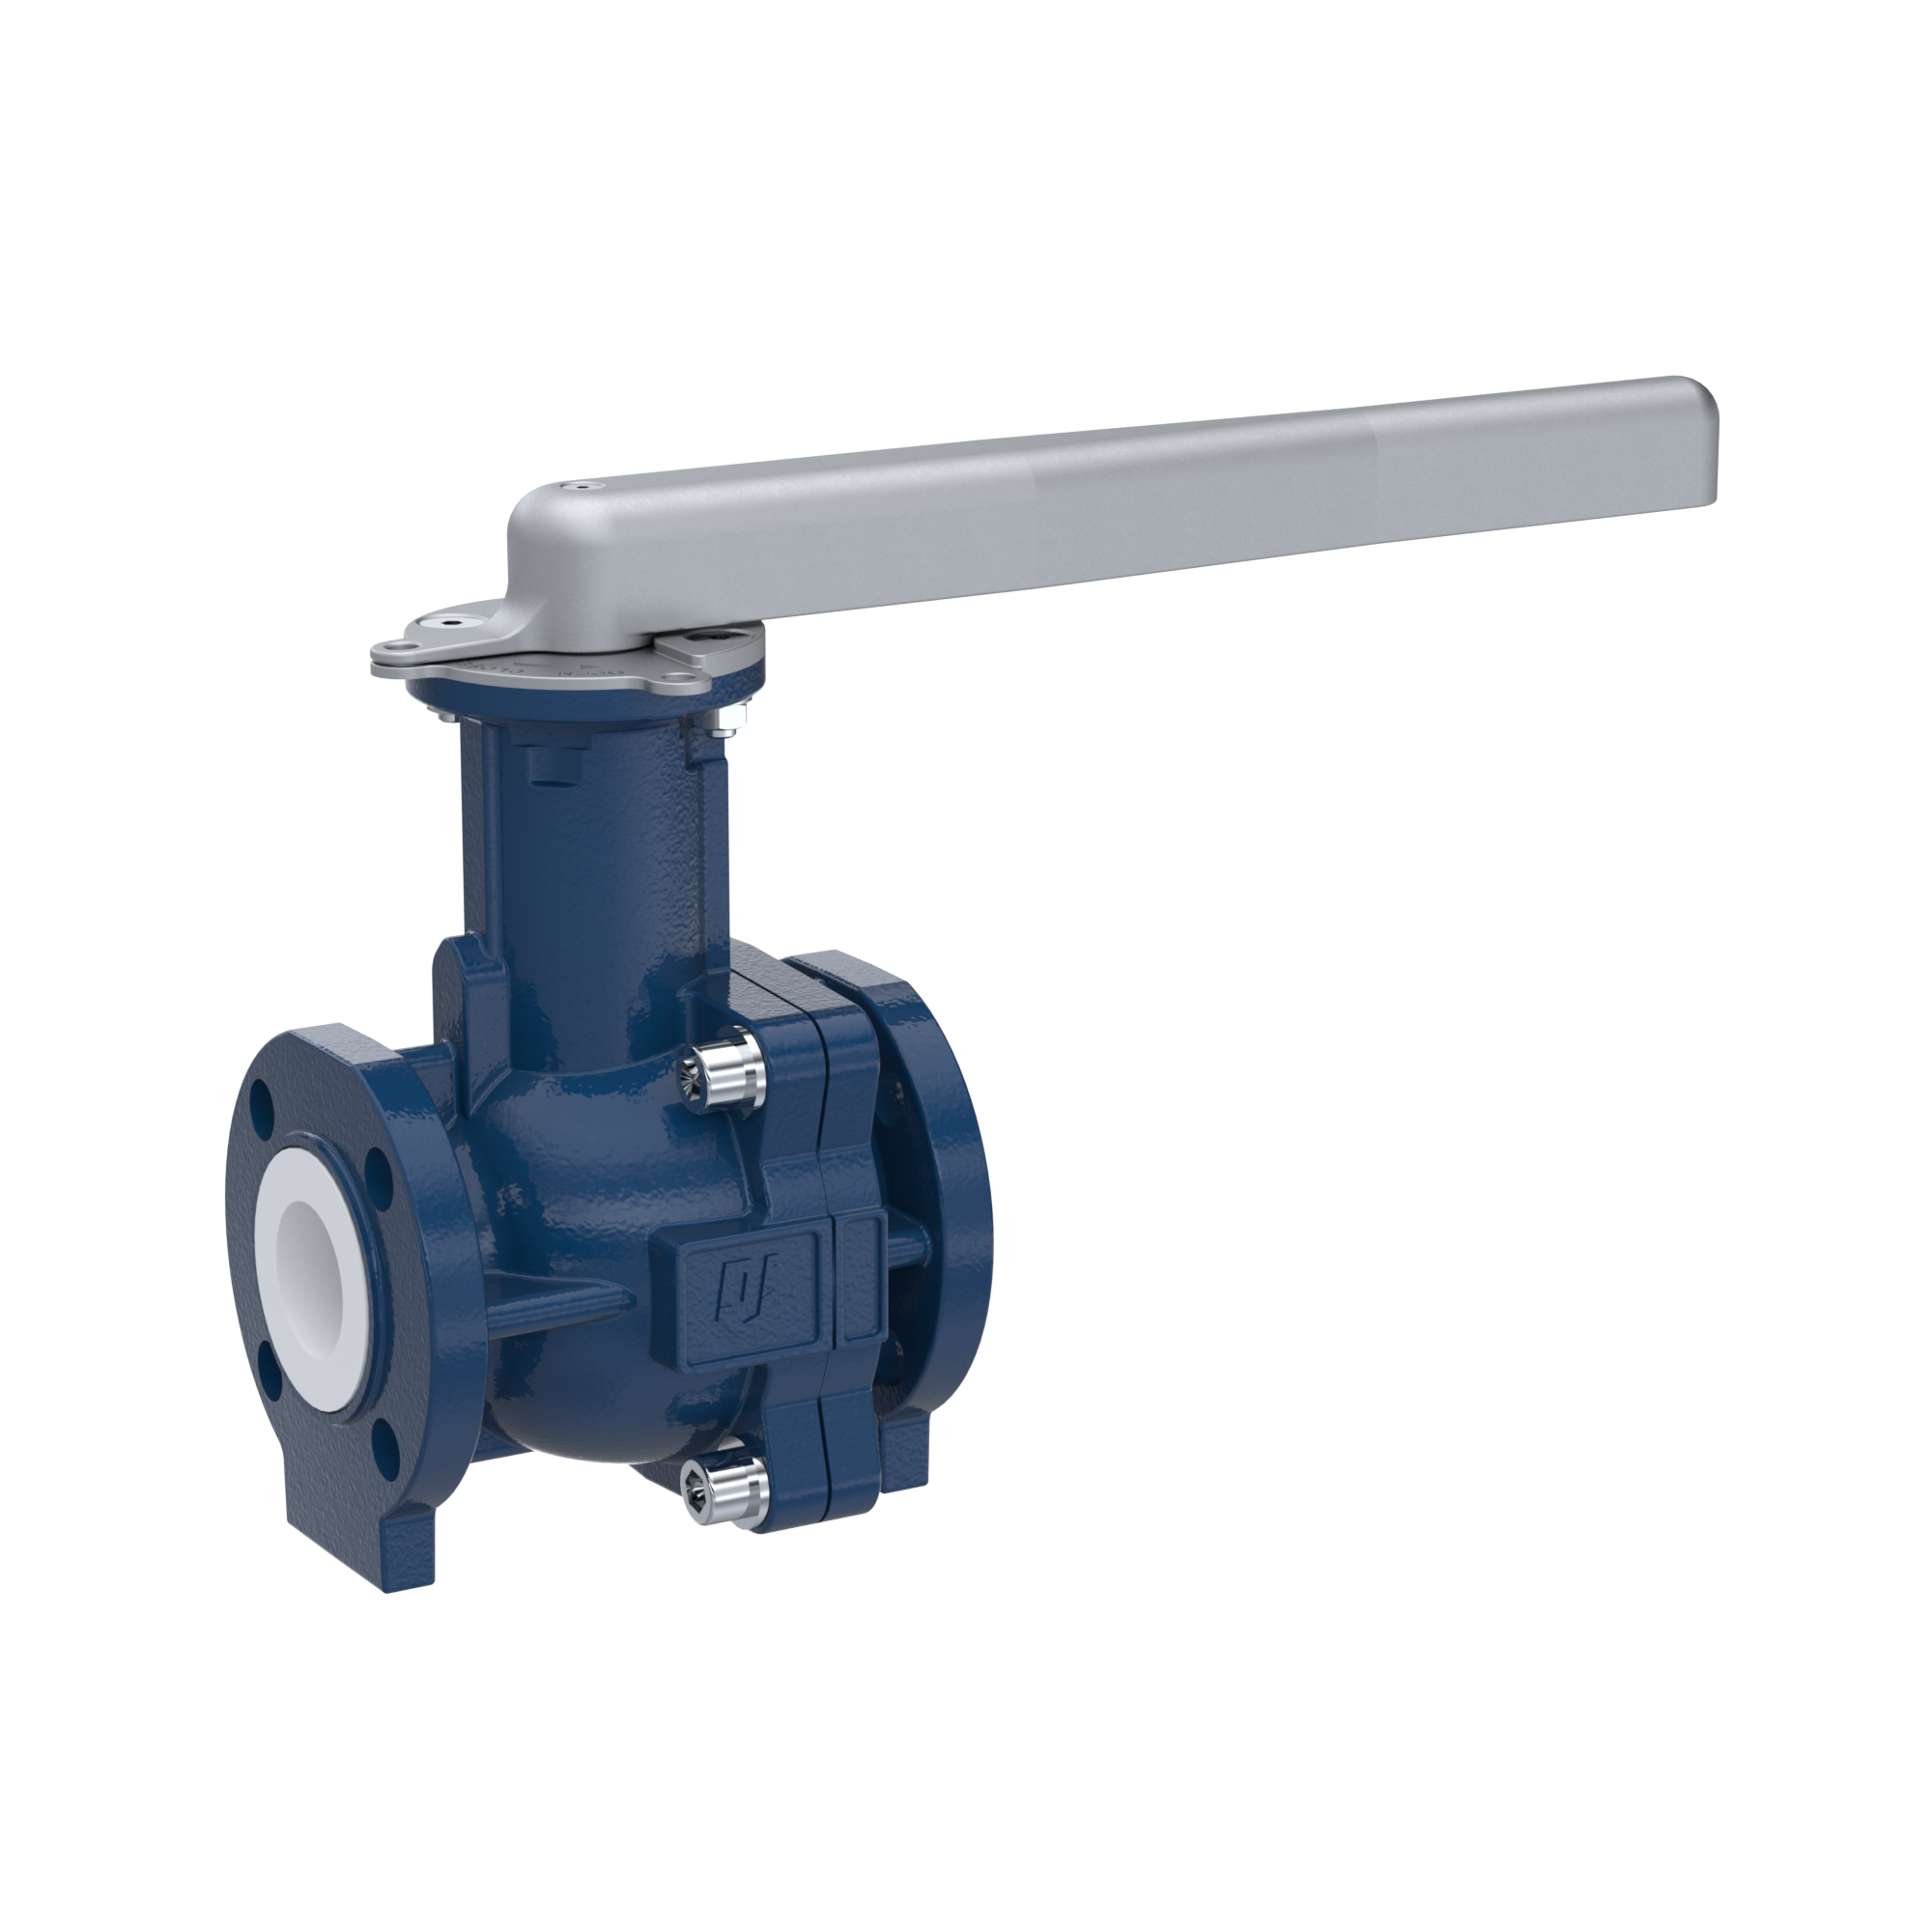 PFA-flange ball valve FK13 DN50 - 2" inch ANSI 150 made of spheroidal graphite cast iron with lever hand